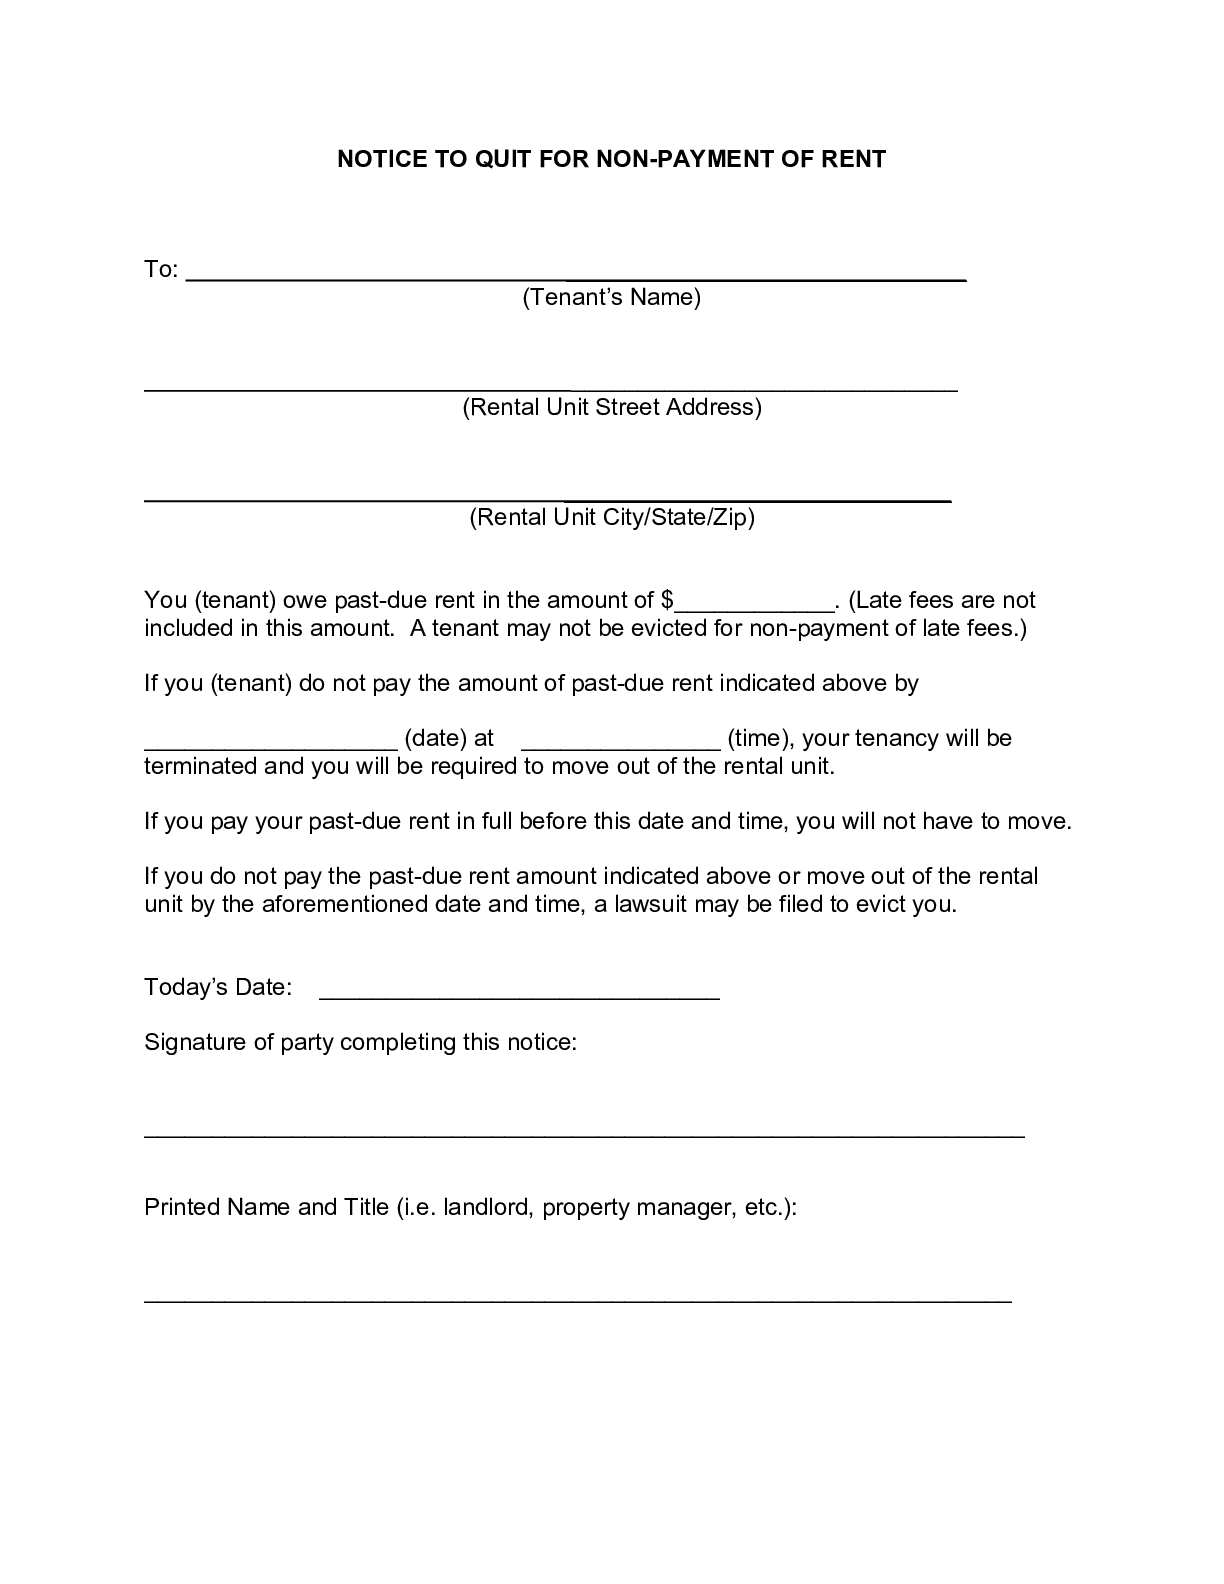 Apartment Lease Termination Letter Sample from ipropertymanagement.com